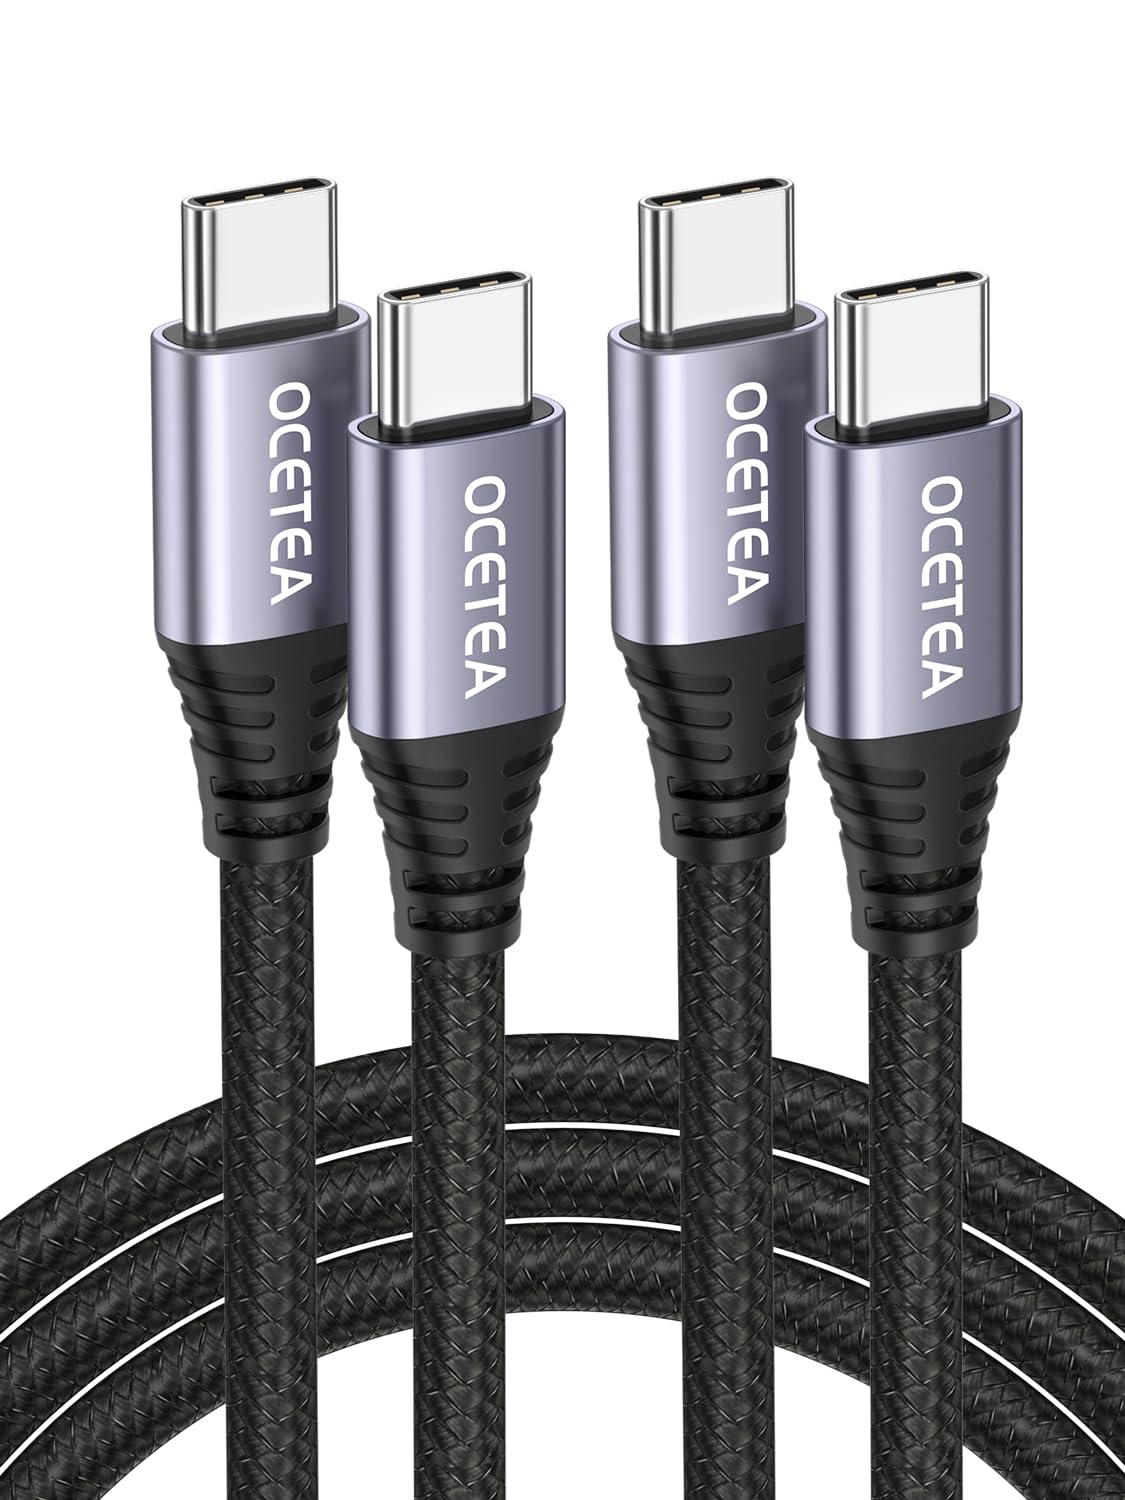 Limited-time deal: Ocetea USB C to USB C Cable 3.3ft, 2-Pack 60W USBC to USBC Cord, Type C to C Charger Cable Fast Charging for iPhone 15/15 Pro/15 Plus/15 Pro Max, Samsu - $3.24